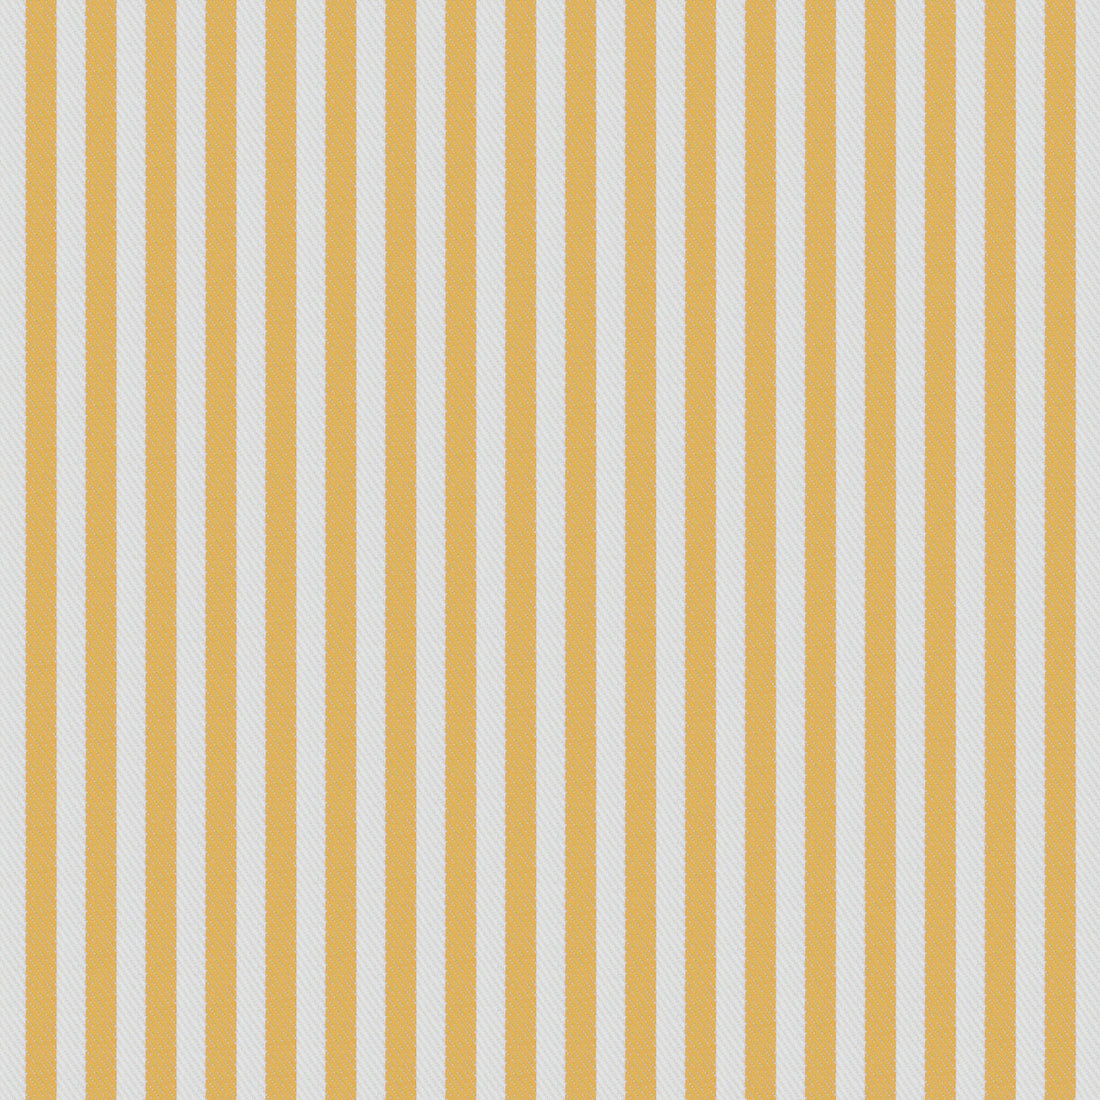 Calobra fabric in amarillo color - pattern GDT5684.008.0 - by Gaston y Daniela in the Gaston Maiorica collection